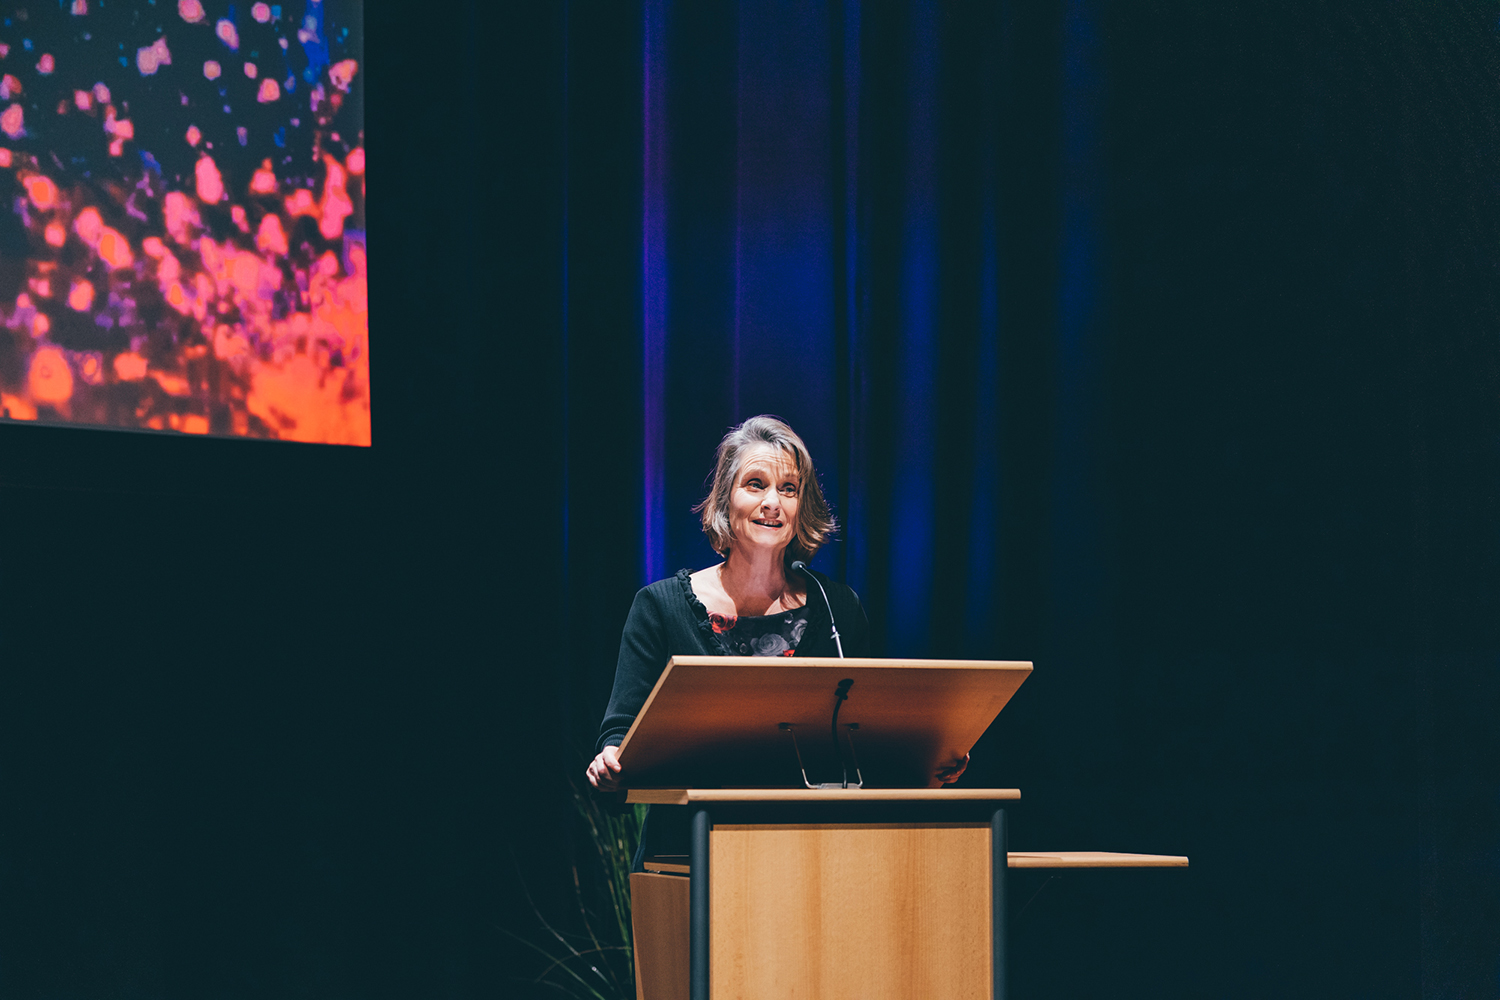 Madeline Eacott at a lectern at the Excellence in Education Awards 2022.